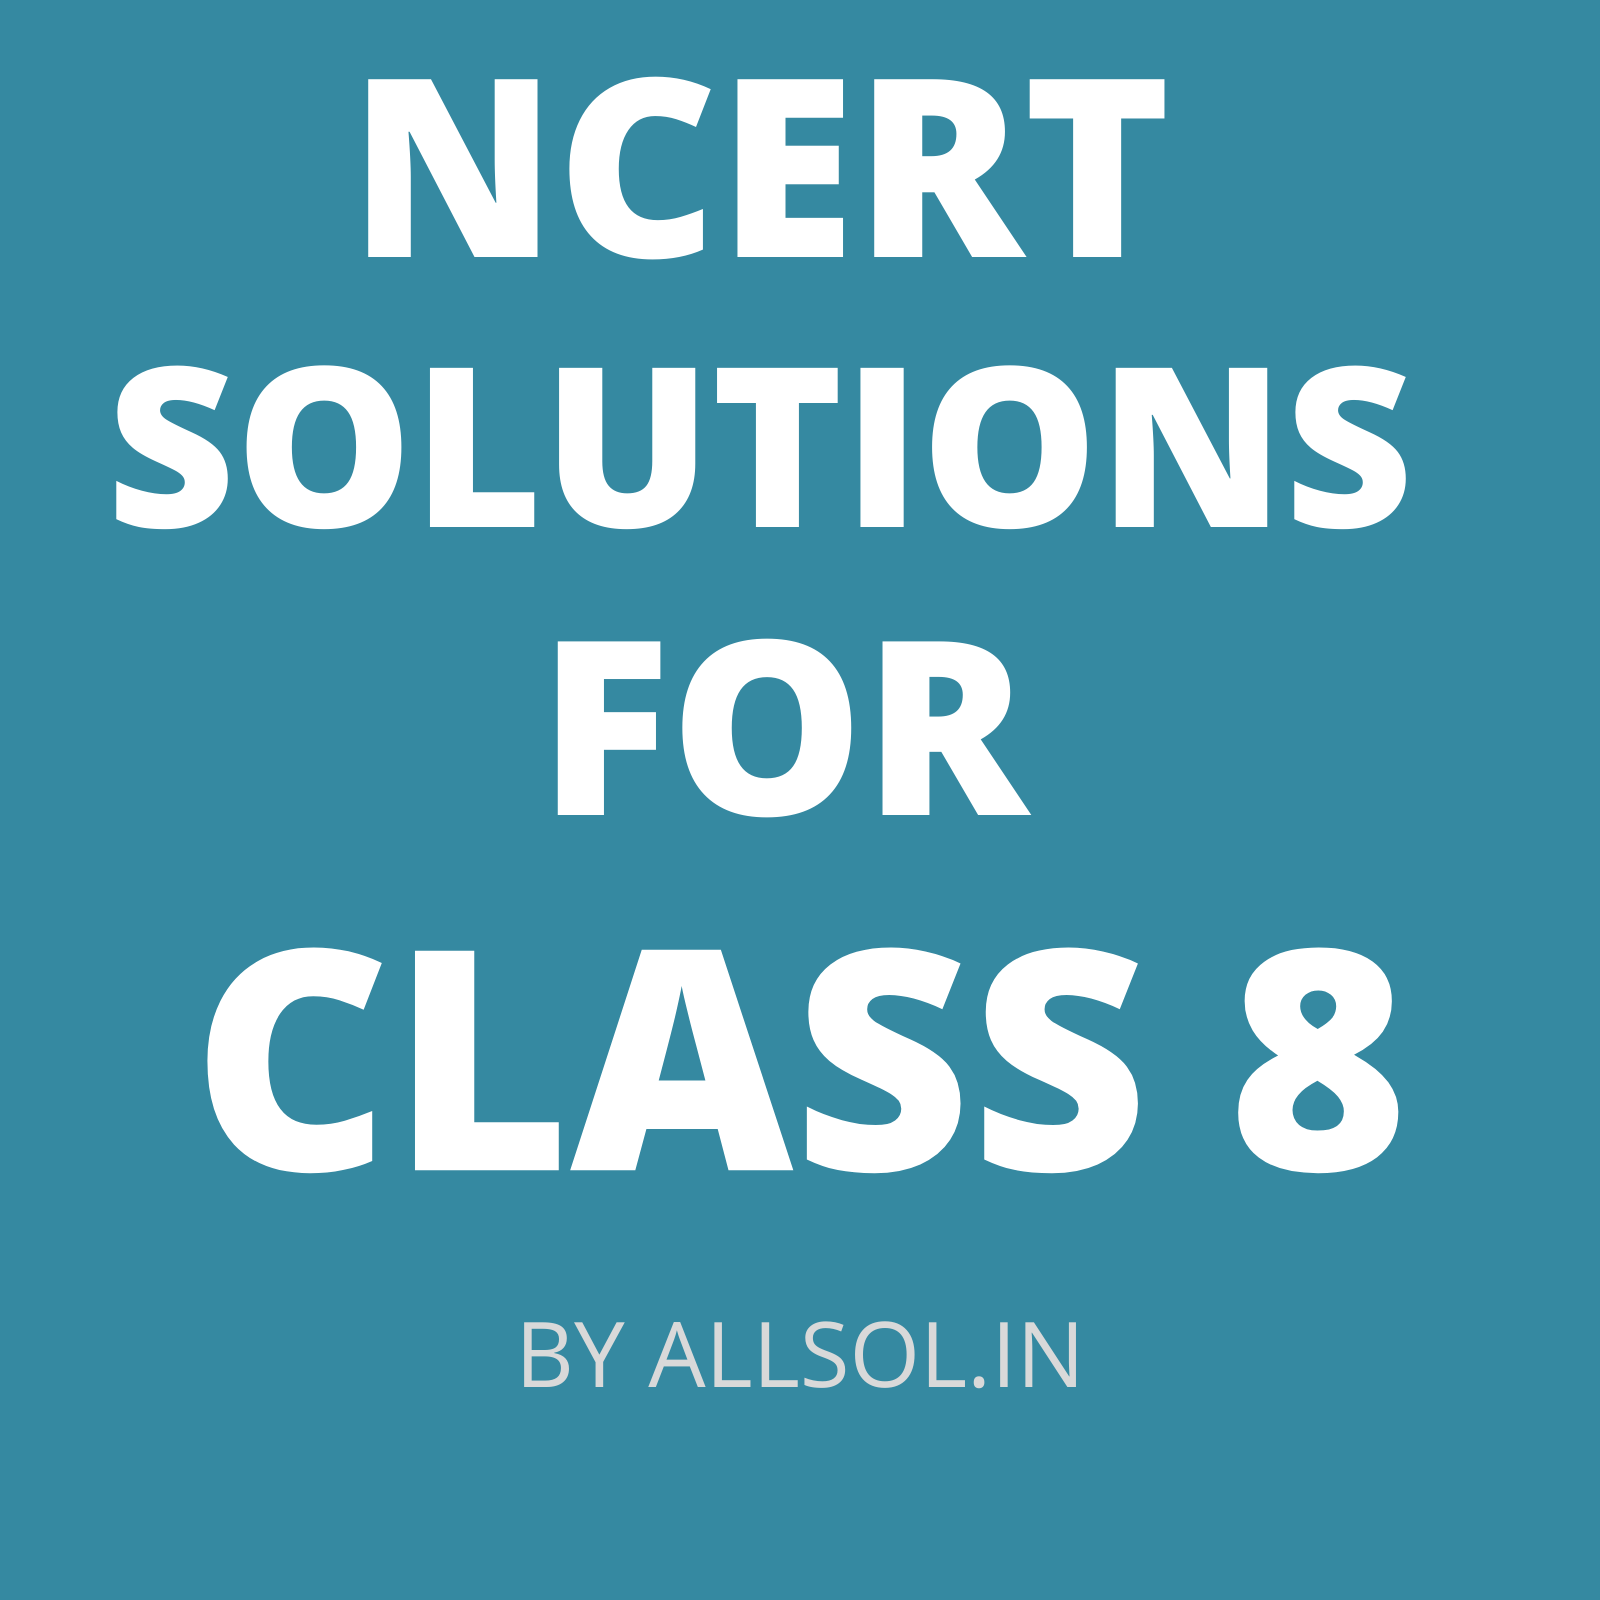 NCERT Solutions for Class 8 |